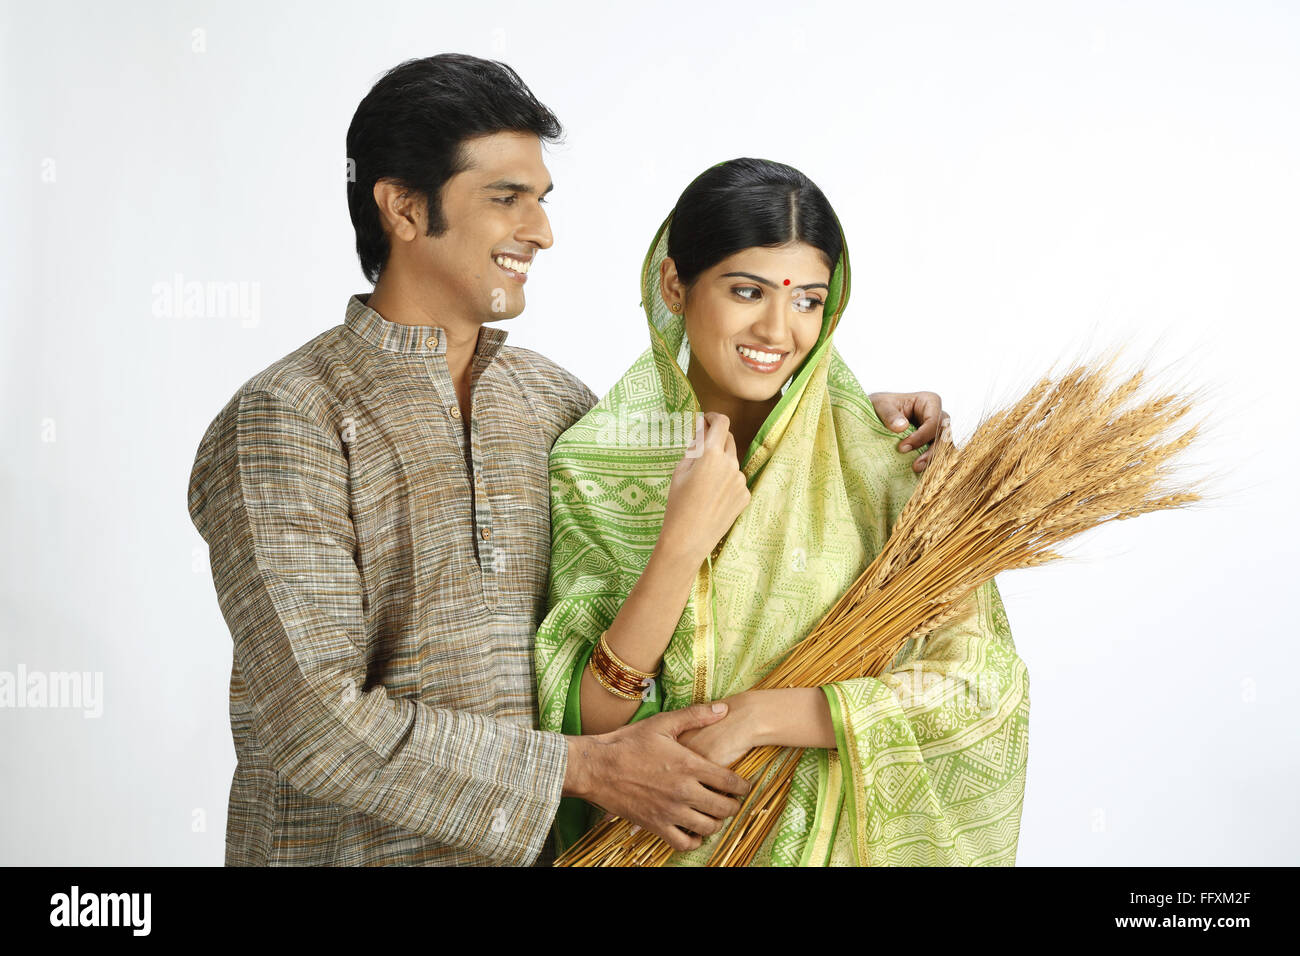 Indian farmer looking at wife holding harvested golden wheat crop - MR#743A,743B Stock Photo